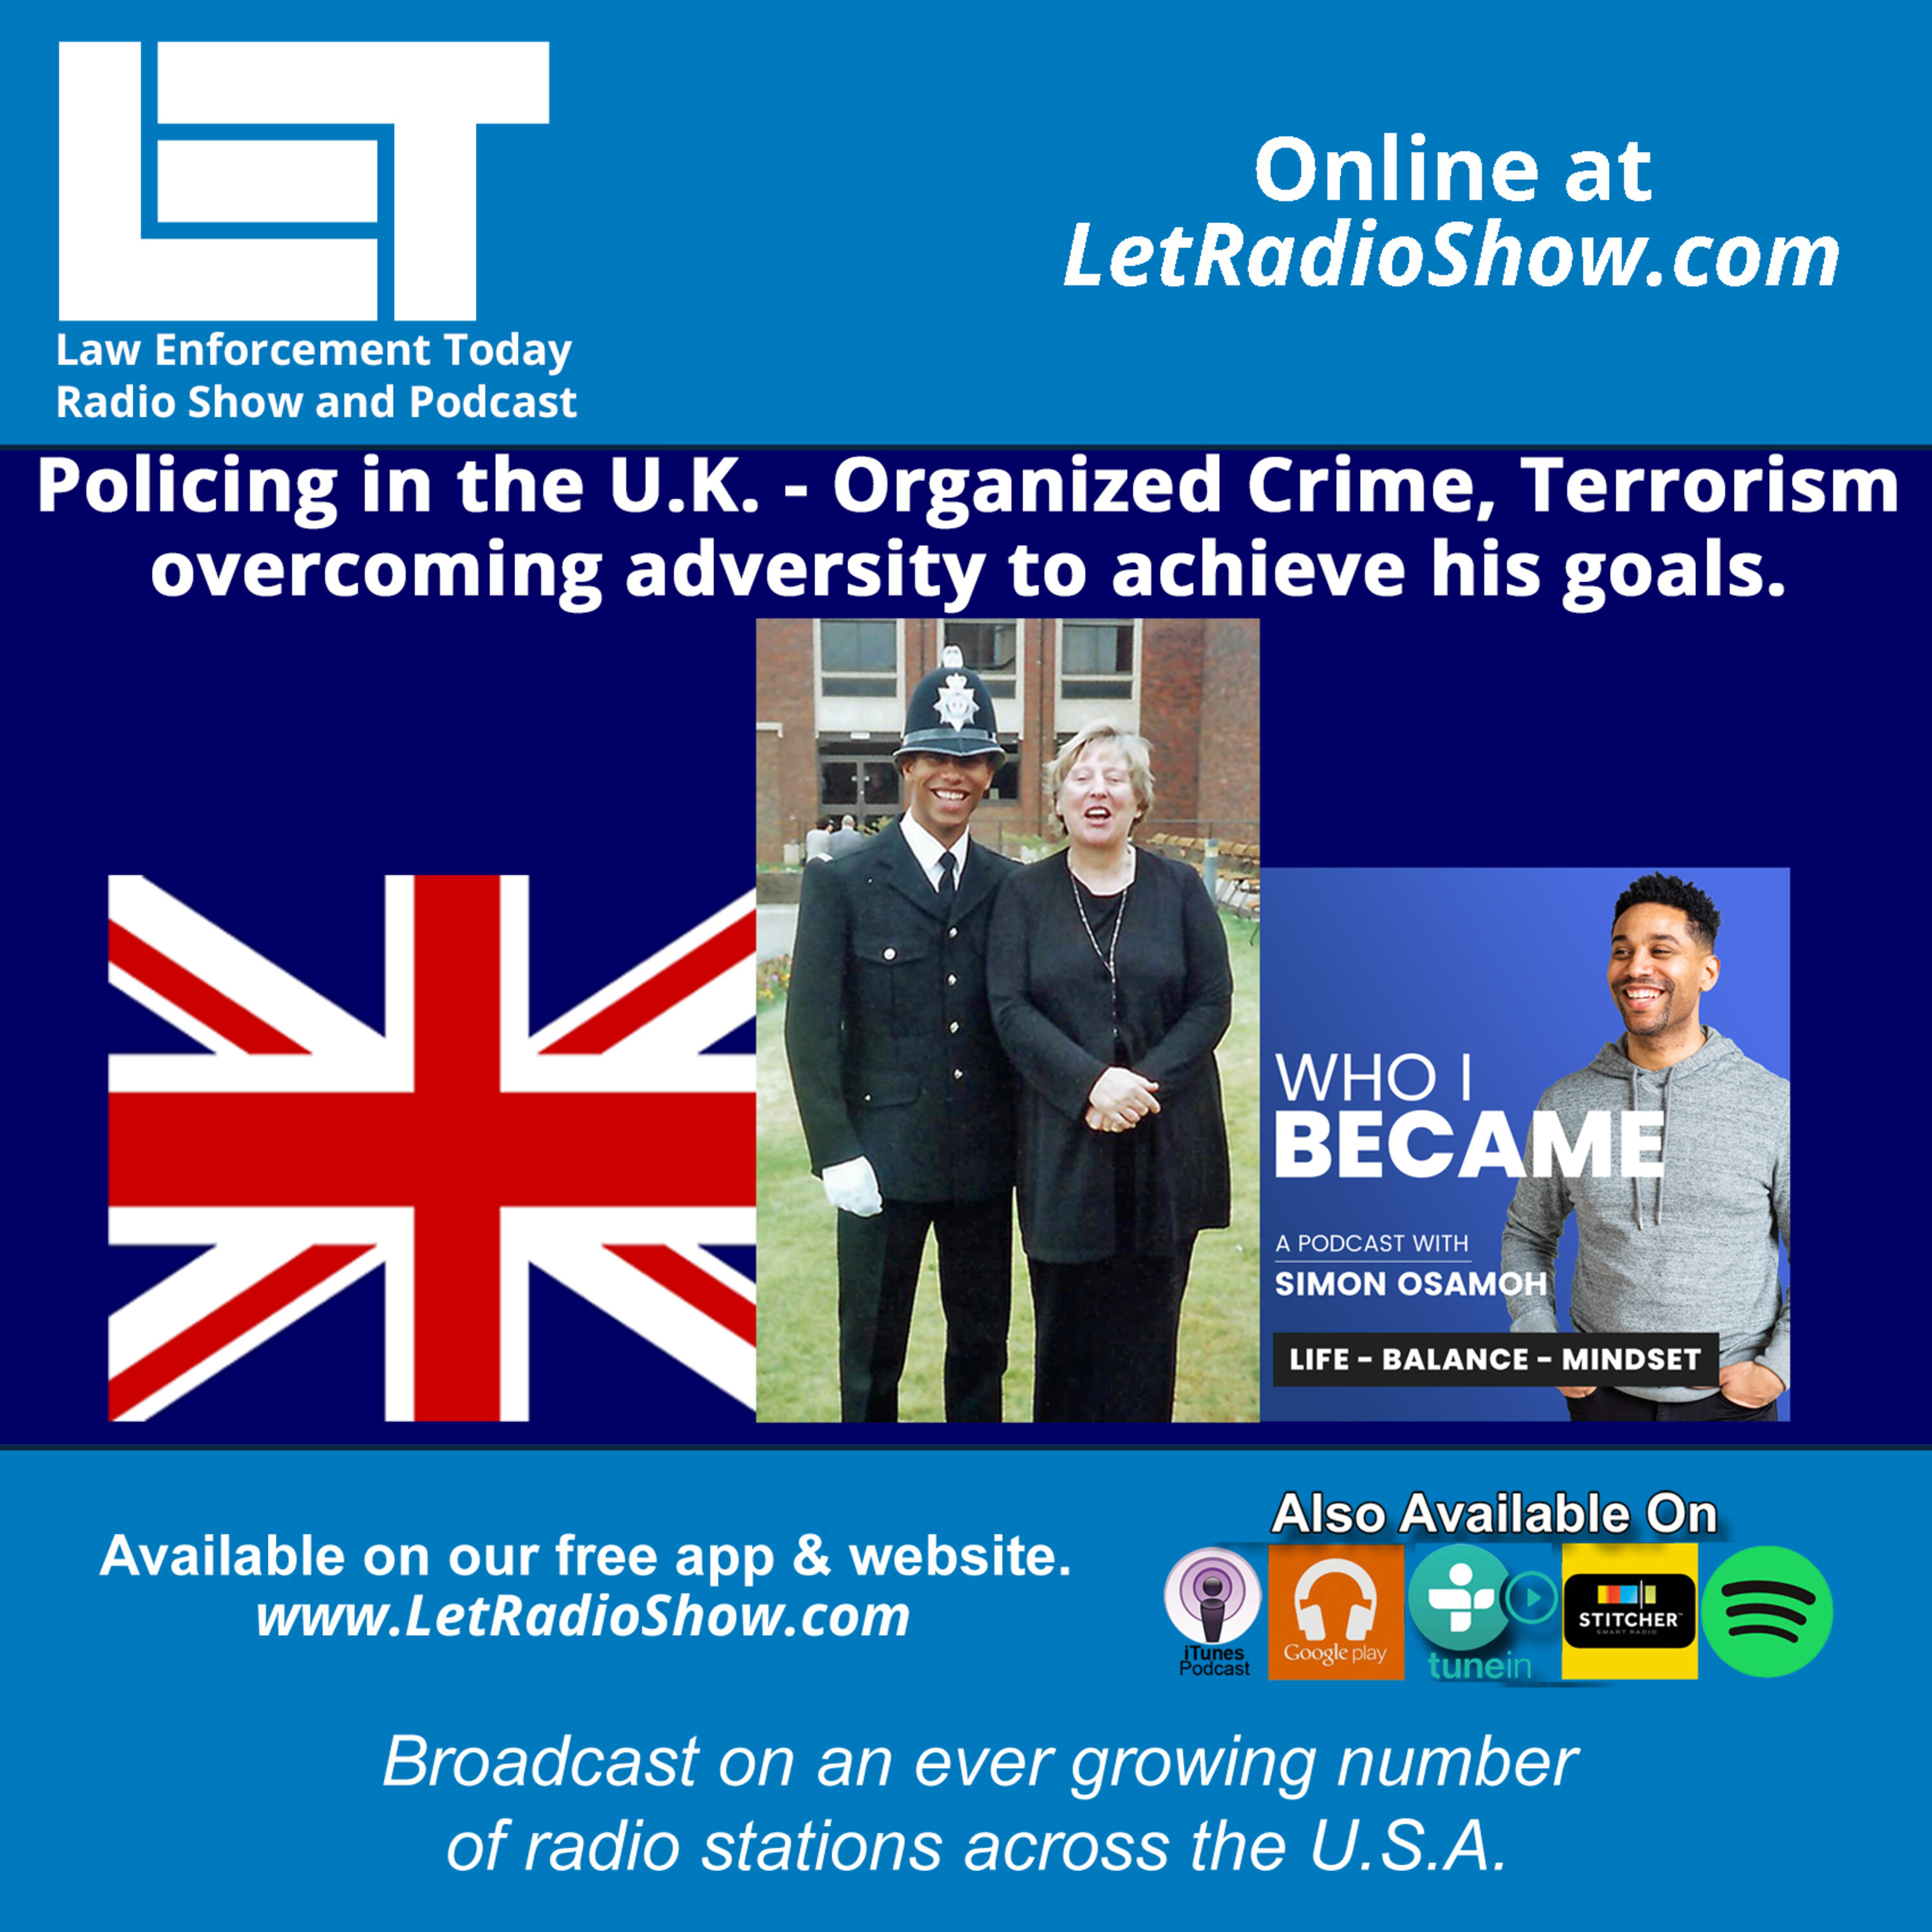 S5E43: Policing in the U.K. - Organized Crime, Terrorism,  overcoming adversity to achieve his goals.